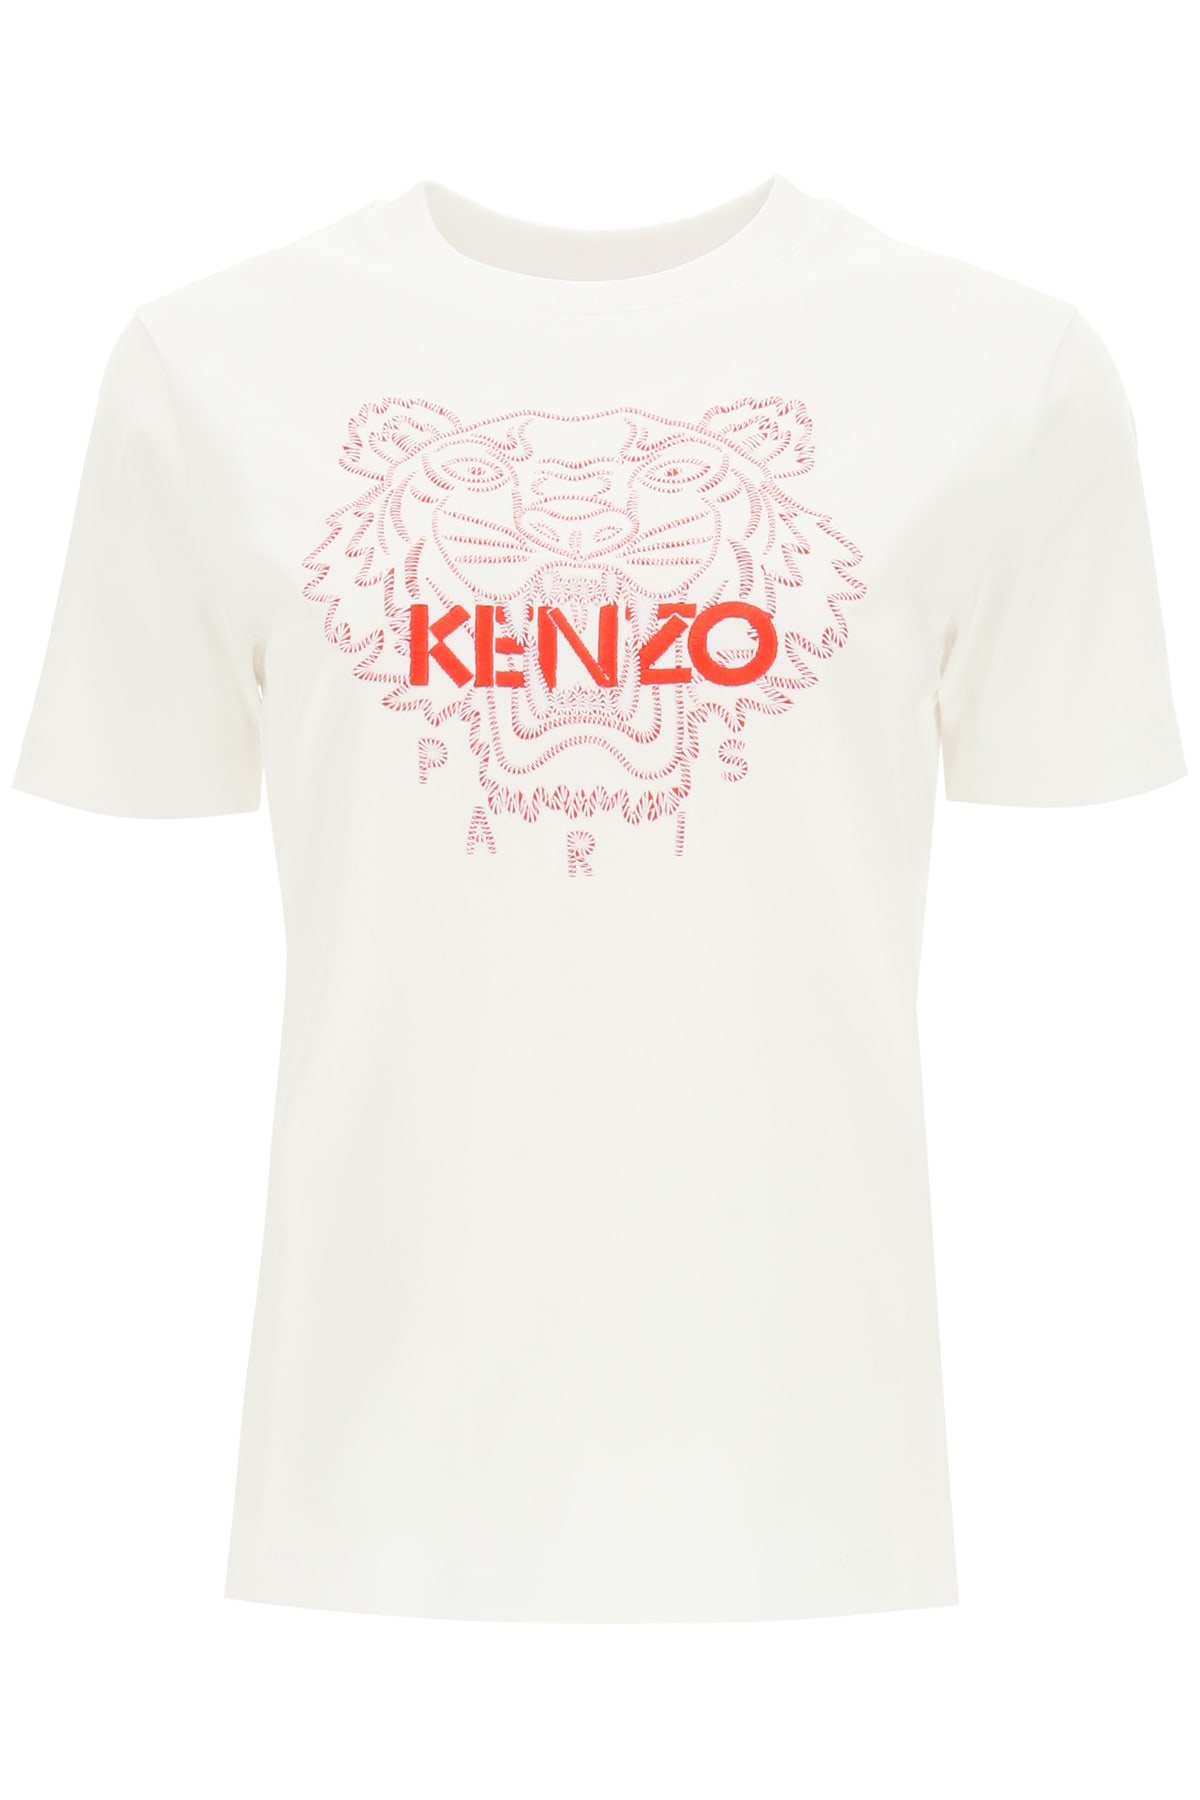 Kenzo T-shirt Tiger Actua Cny Embroidery In Bianco